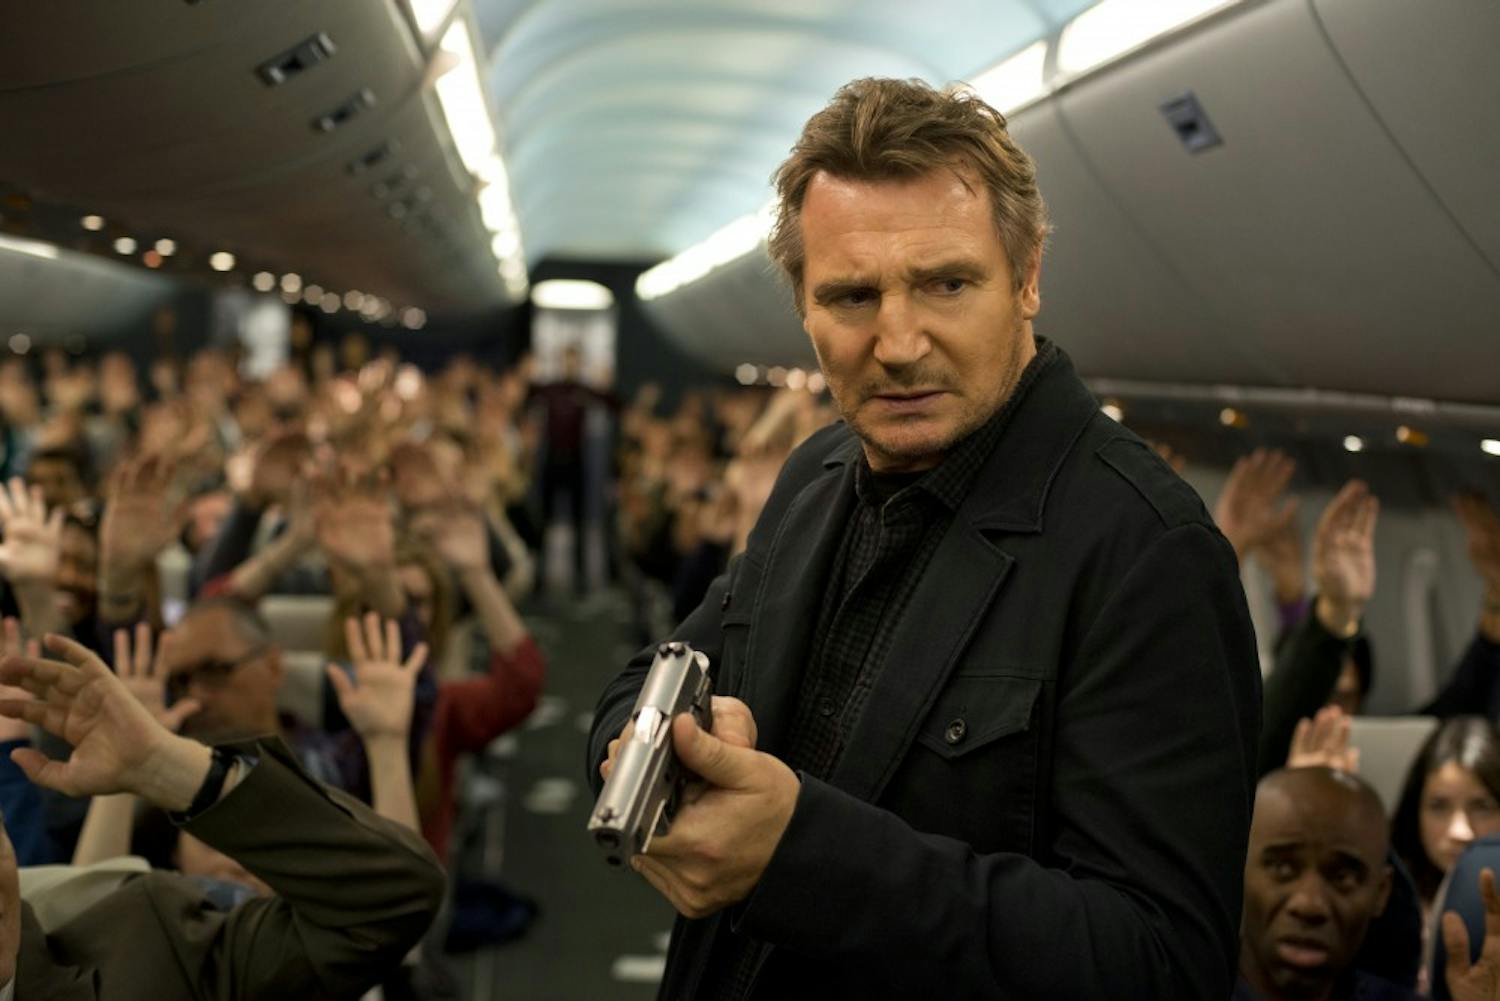 Global action star LIAM NEESON stars in “Non-Stop”, a suspense thriller played out at 40,000 feet in the air.  During a transatlantic flight from New York City to London, U.S. Air Marshal Bill Marks (Neeson) receives a series of cryptic text messages demanding that he instruct the airline to transfer $150 million into an off-shore account.  Until he secures the money, a passenger on his flight will be killed every 20 minutes.  